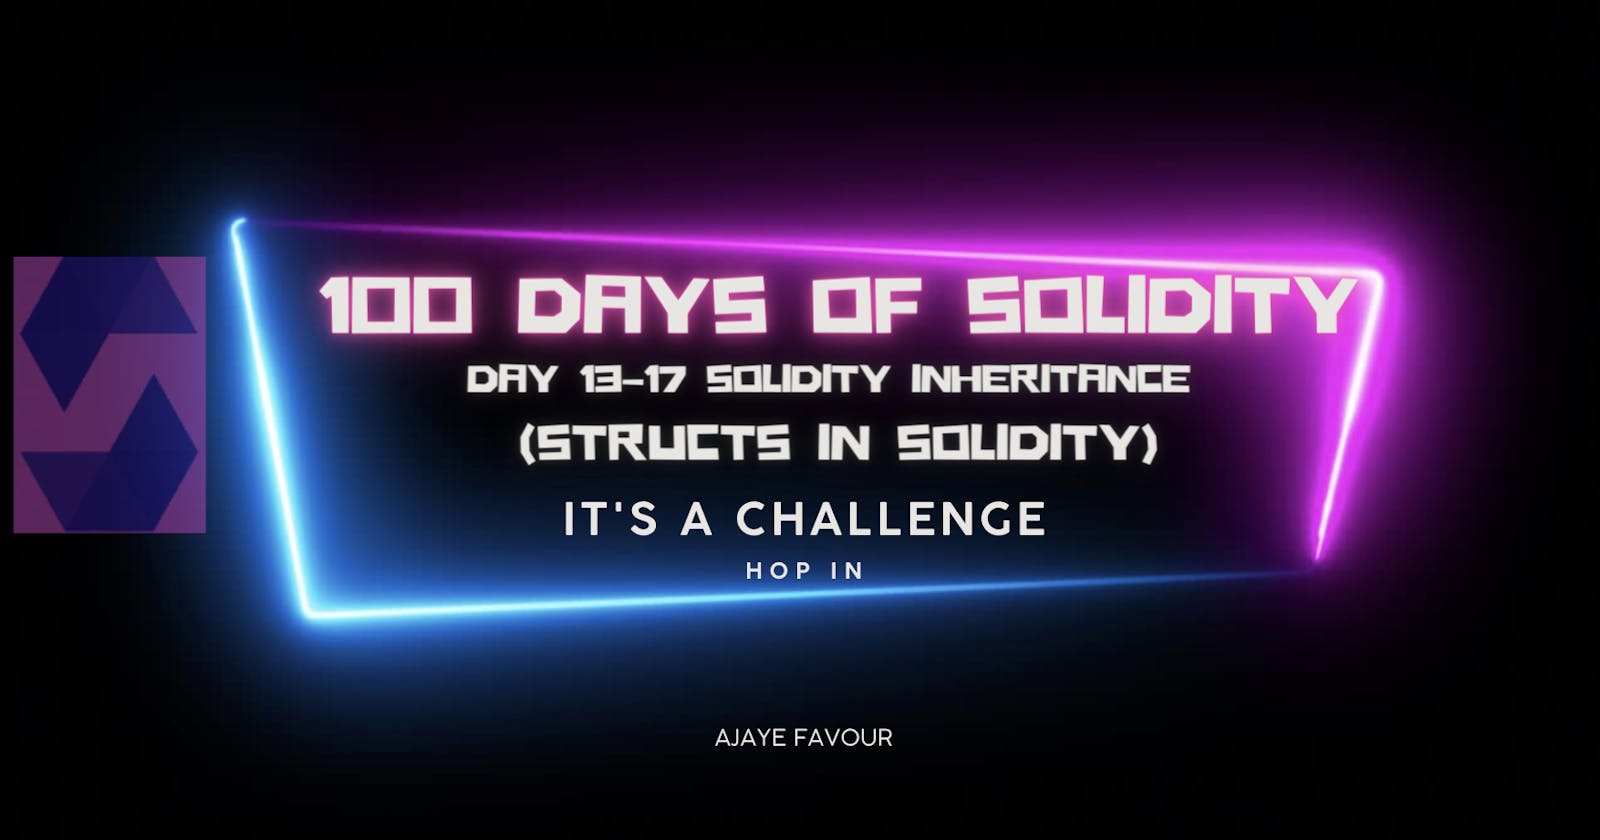 Structs in Solidity